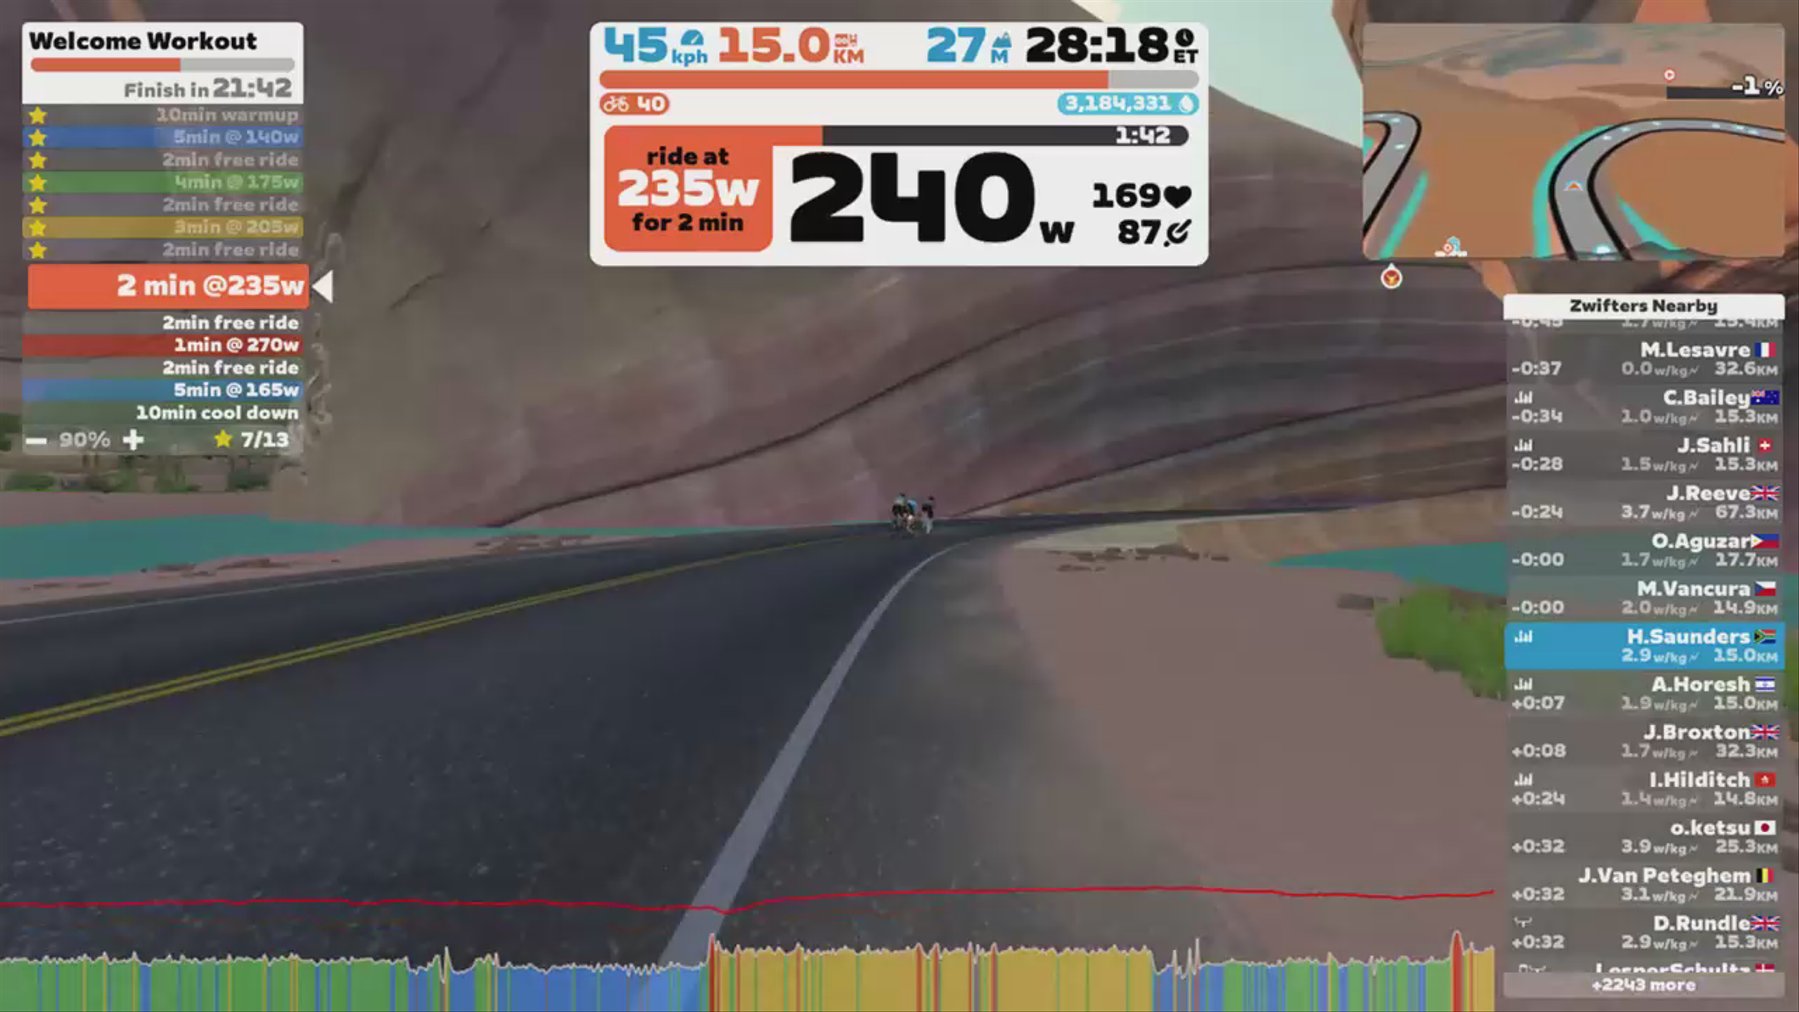 Zwift - Welcome Workout on Big Flat 8 in Watopia